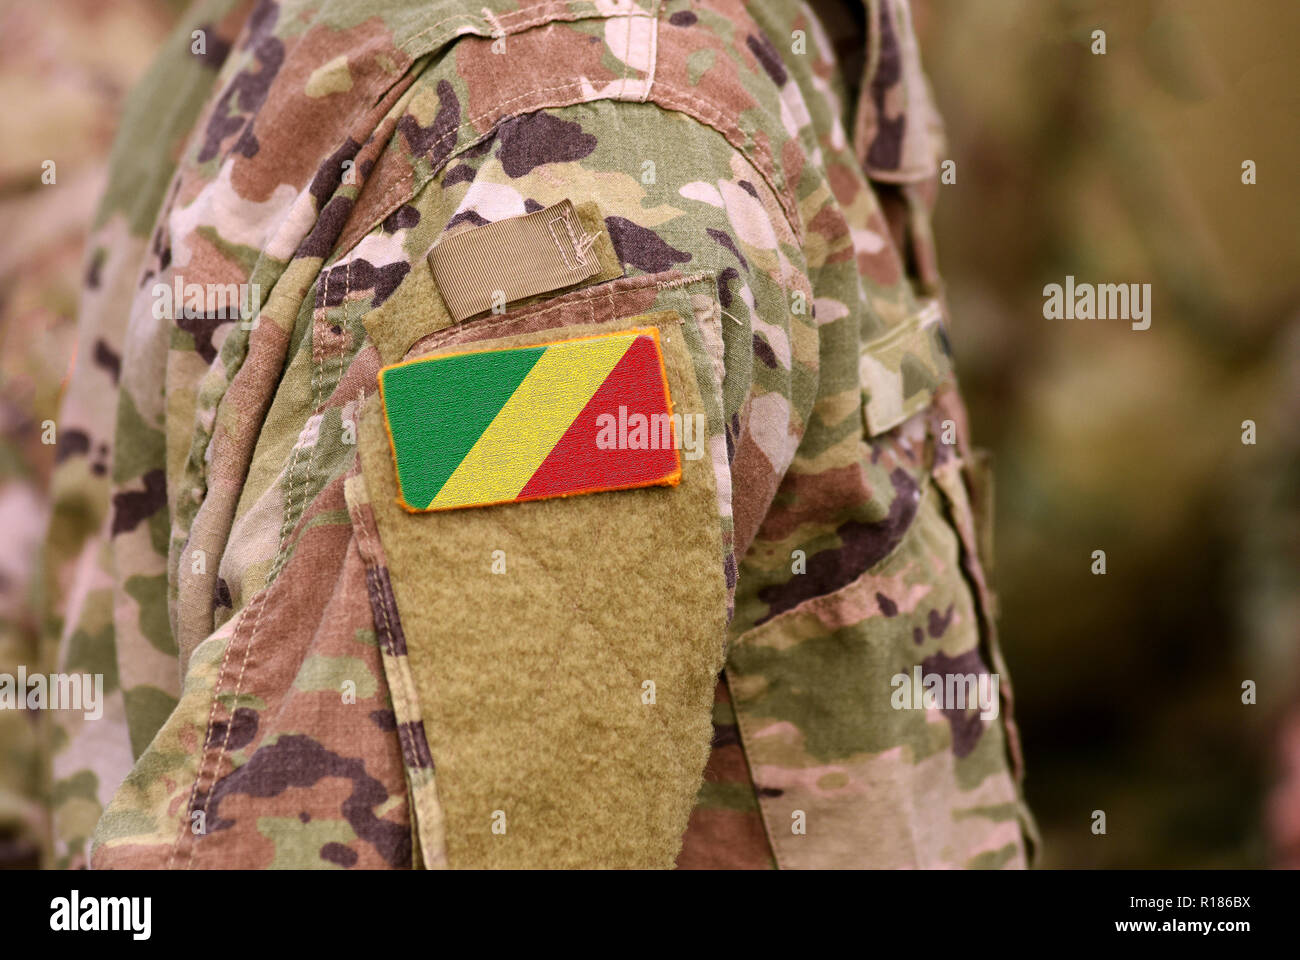 Republic of the Congo flag on soldiers arm. Republic of the Congo troops (collage) Stock Photo